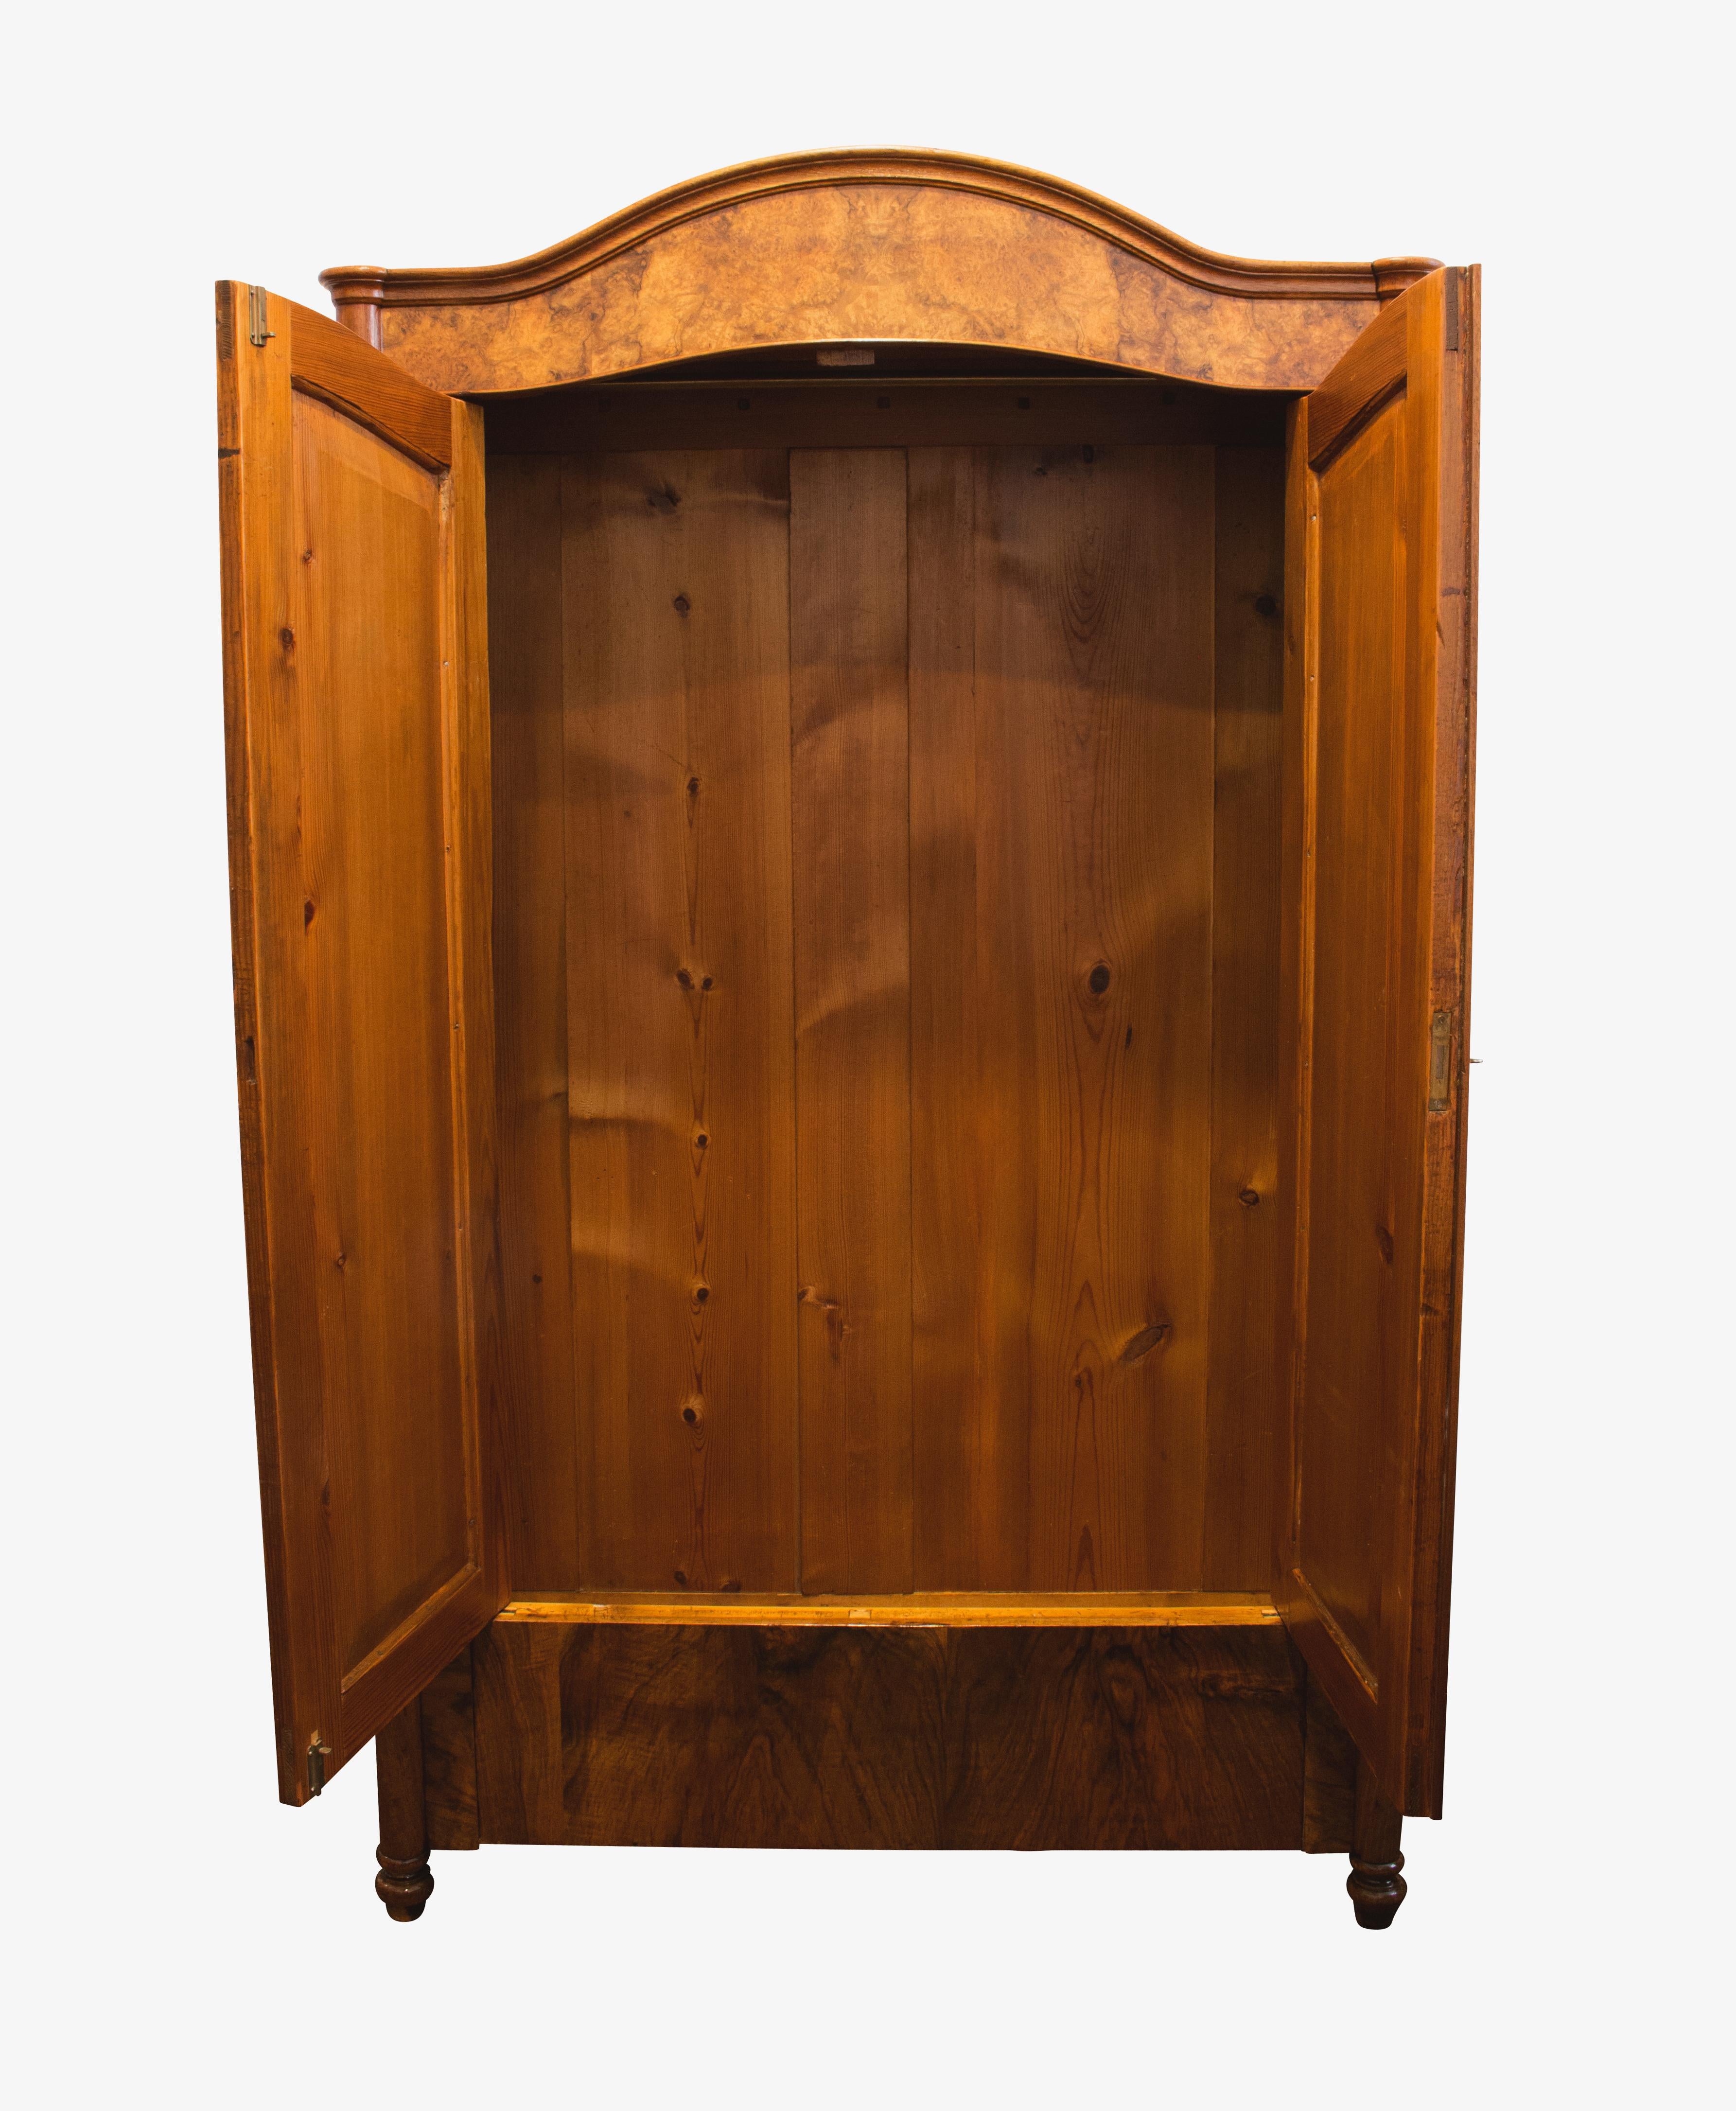 Wonderfully small walnut cabinet or wardrobe veneered on a pine body. The cabinet dates from the time of the late Biedermeier period (Louis Philippe). In a very well restored condition. An interior division in the form of shelves is included in the